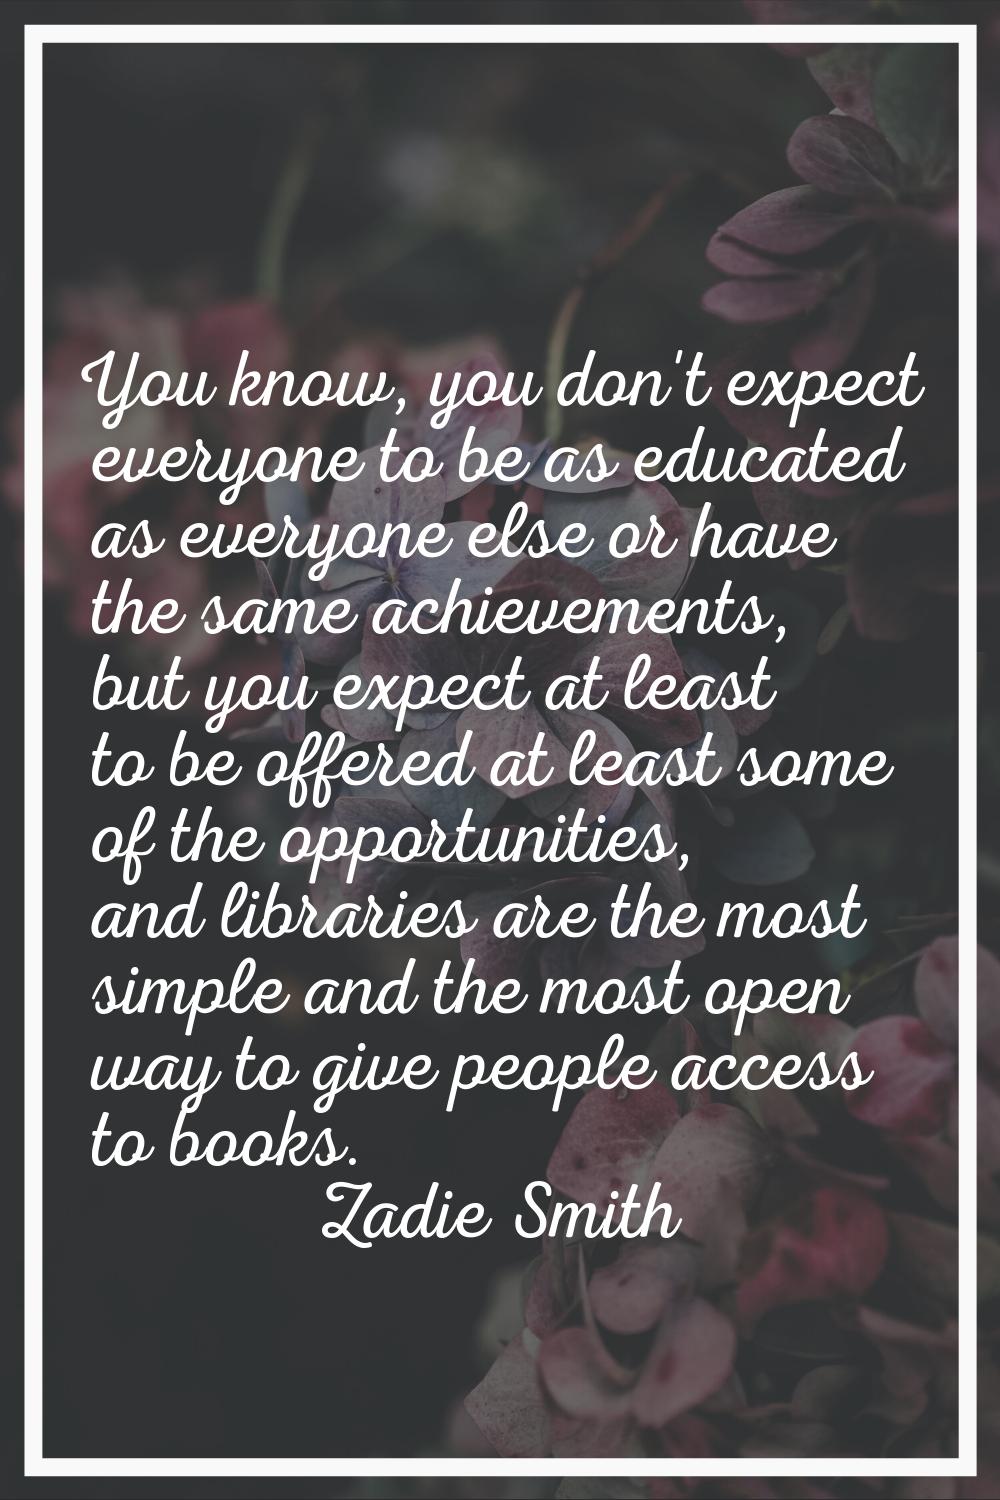 You know, you don't expect everyone to be as educated as everyone else or have the same achievement